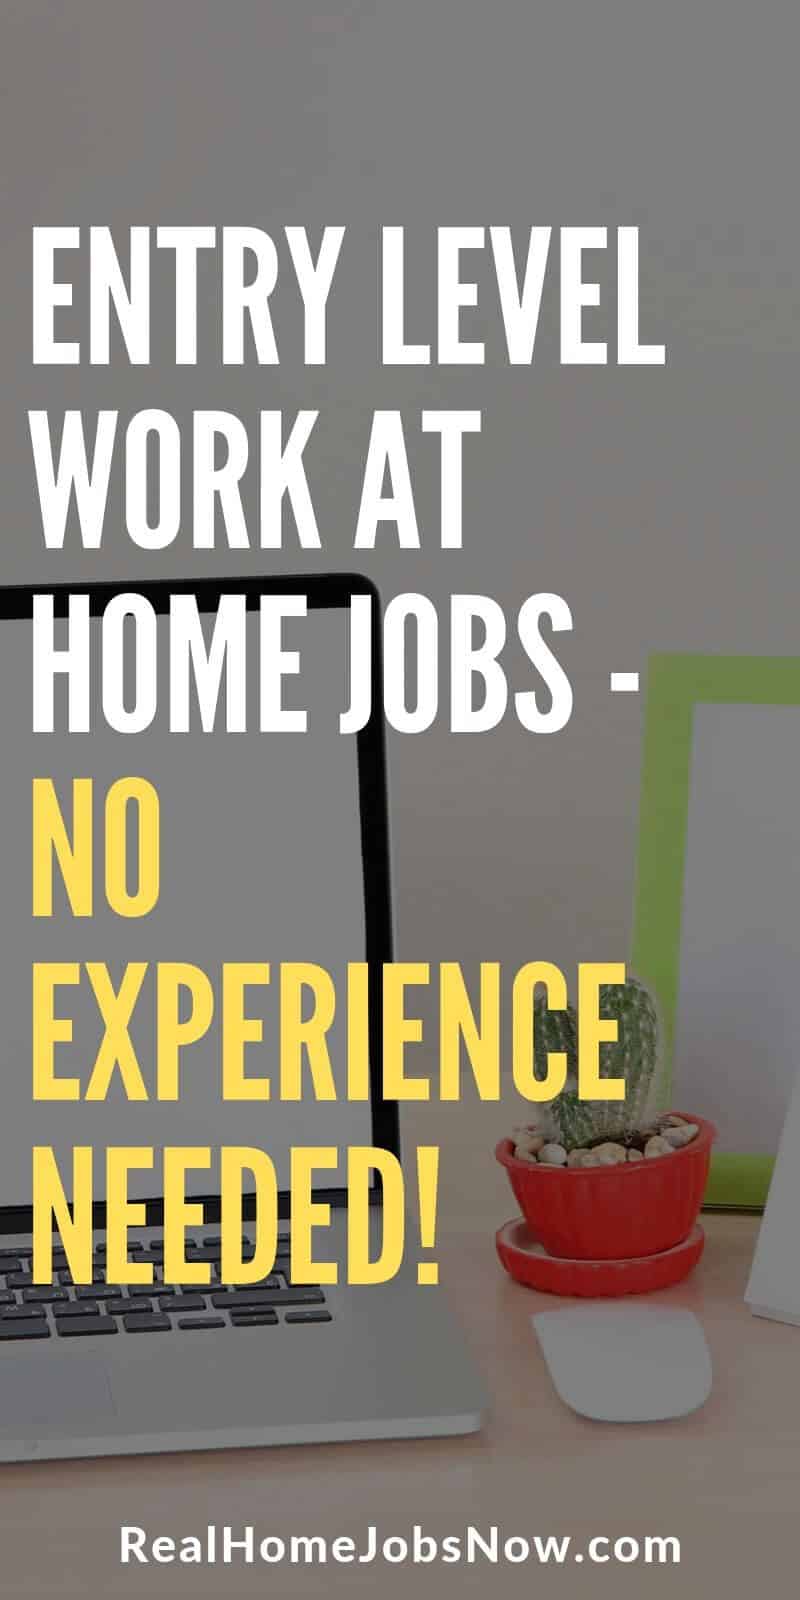 Big list of no experience jobs online that you can start applying for today! Even complete beginners can make money at home at entry level. These companies are legitimate, many are no fee, and a perfect for beginners.